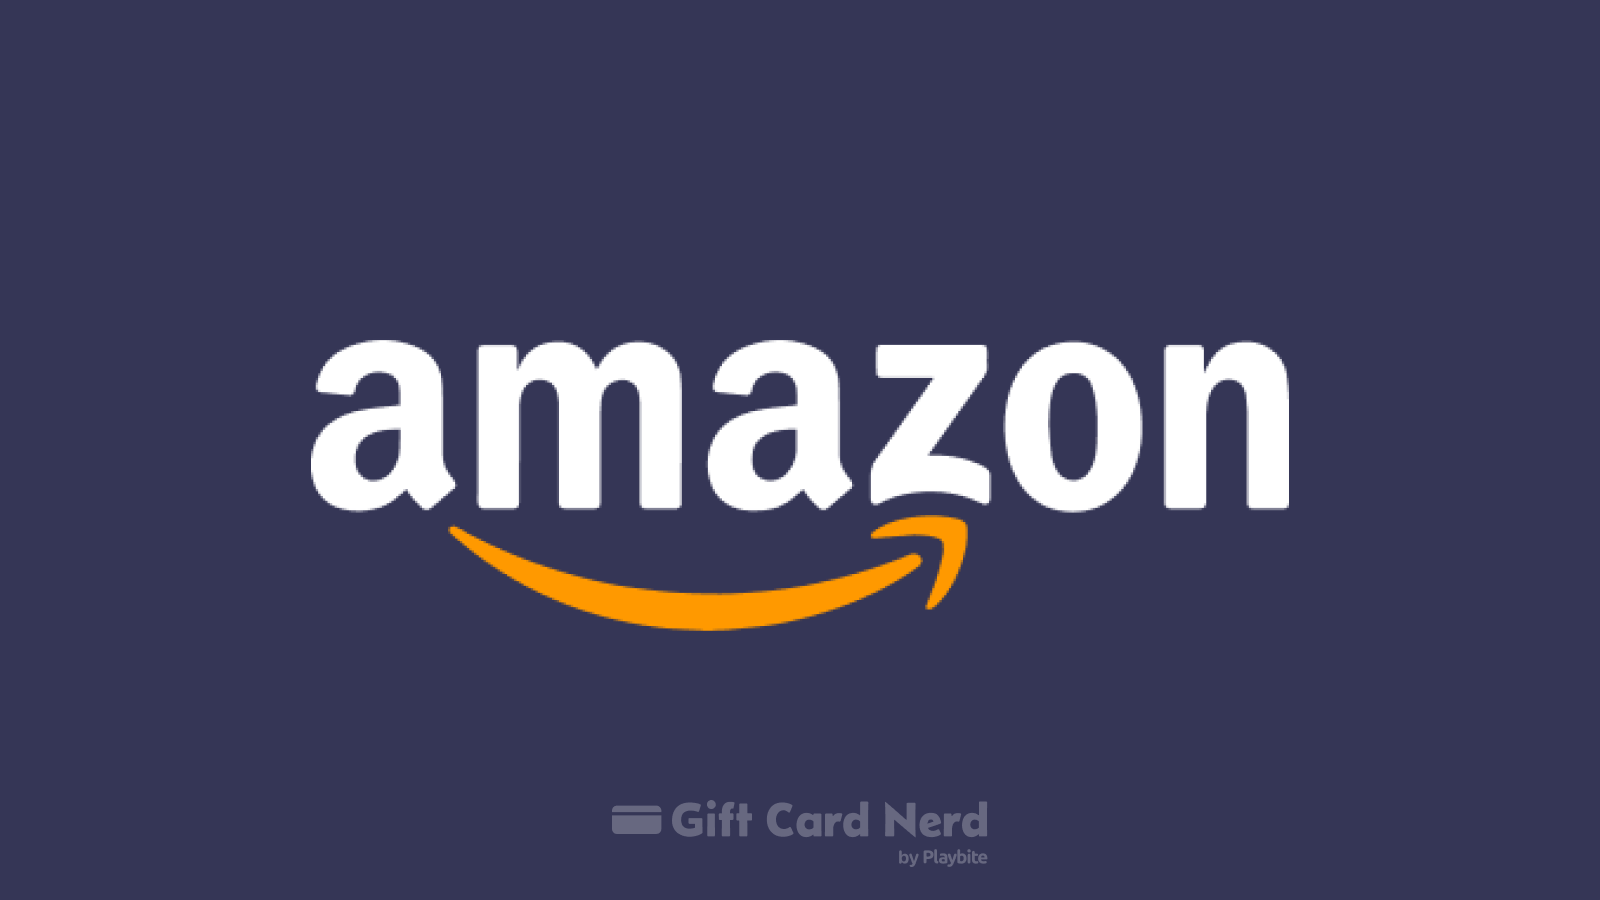 Can I Use an Amazon Gift Card on Steam?